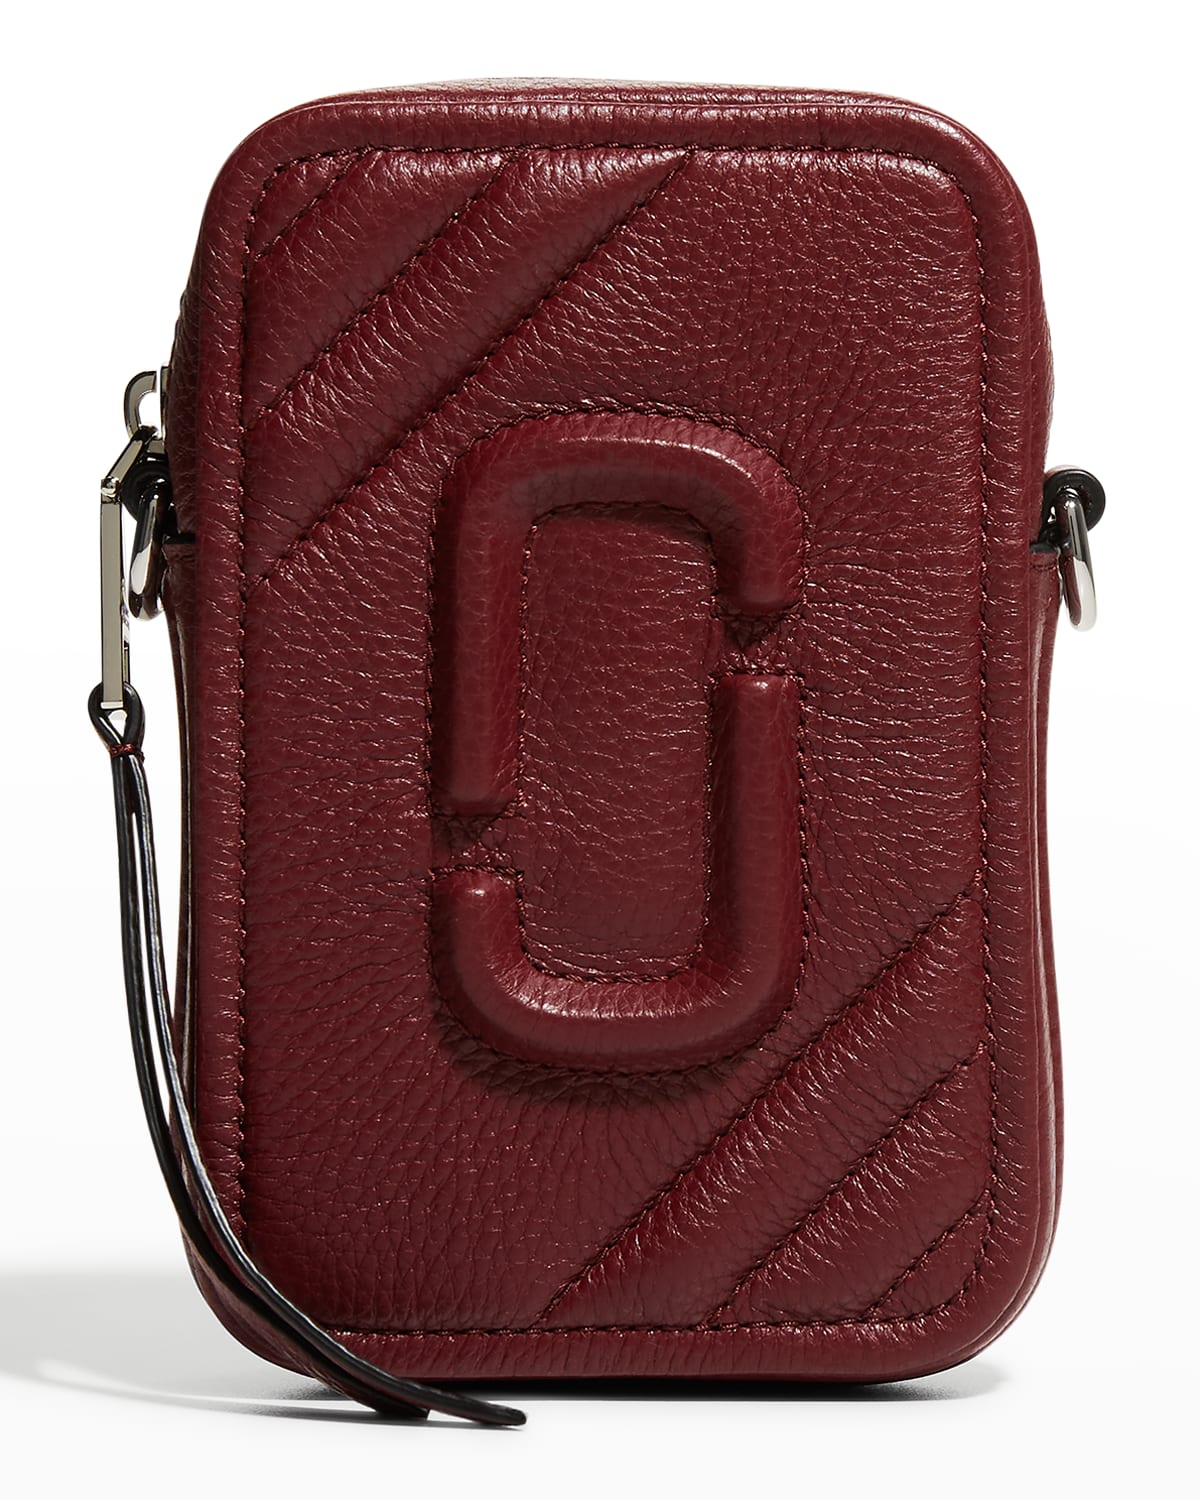 MARC JACOBS LOGO QUILTED PHONE CROSSBODY BAG